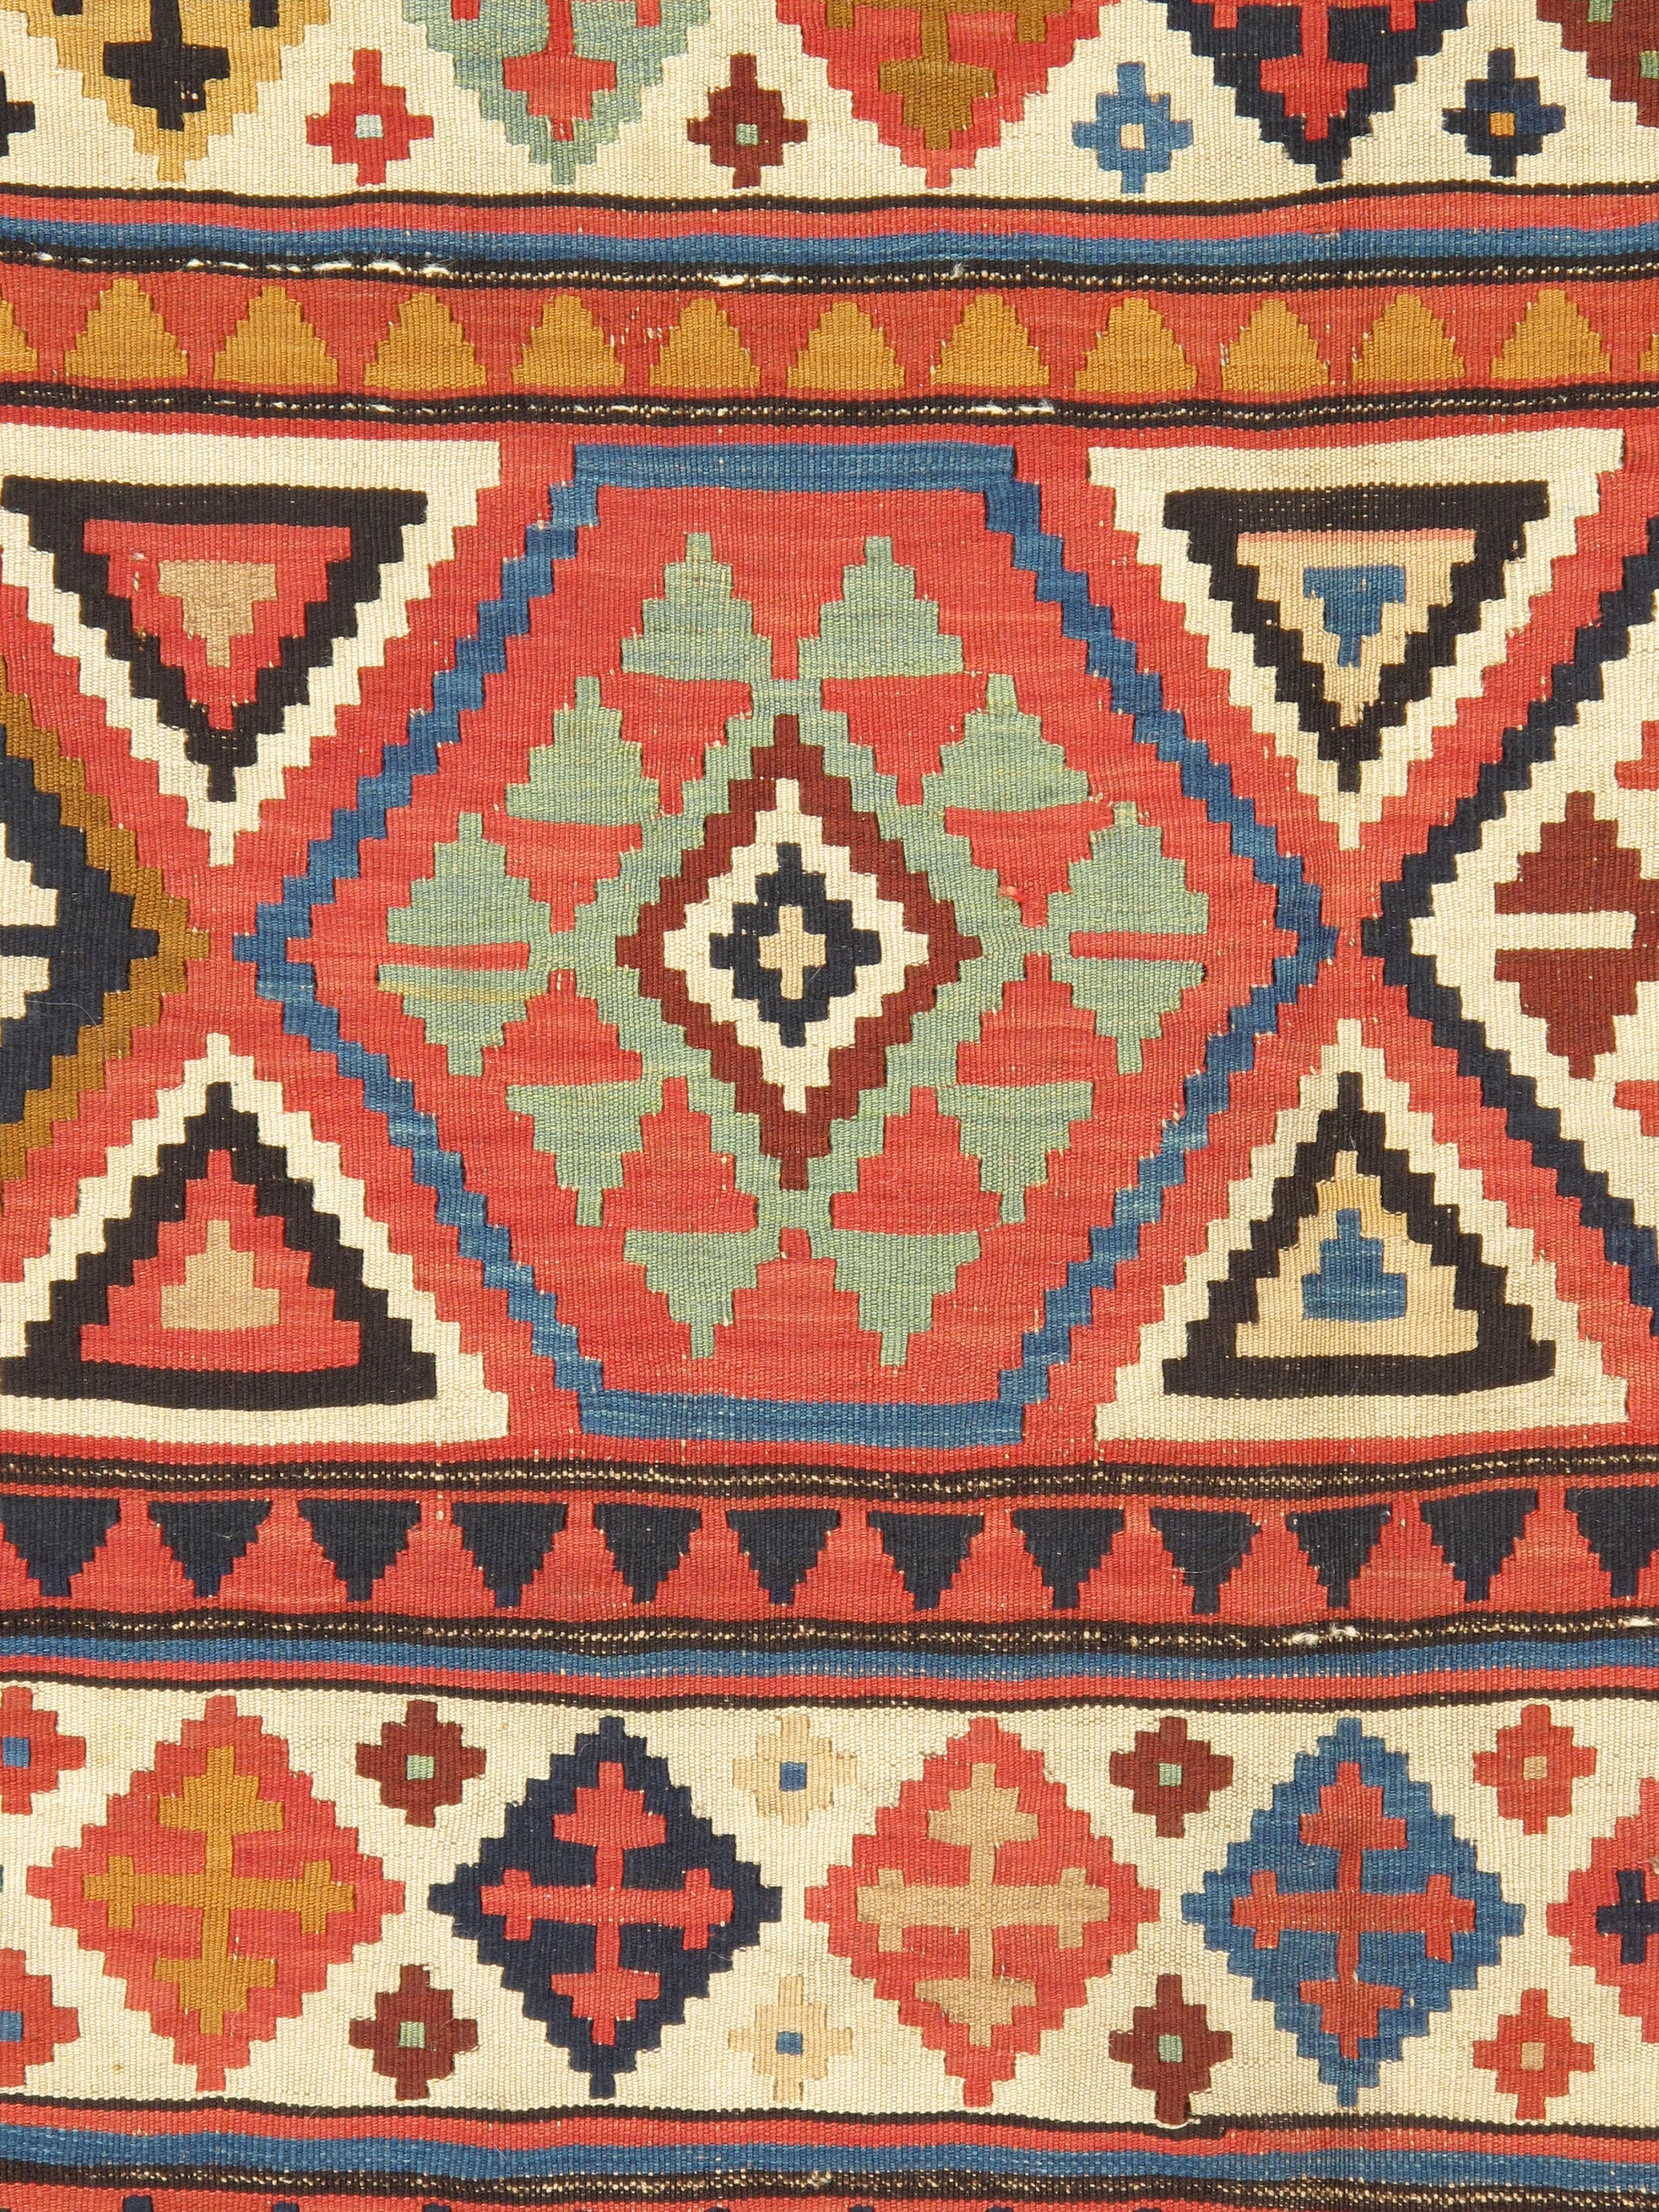 Antique Caucasian Shirvan Kilim.  Size: 5'1 x 9'6. This is a Kilim weave (slit tapestry) flat-woven small carpet from the Shirvan area in a pattern absolutely characteristic of the group. Wide and narrower horizontal bands alternate with stepped